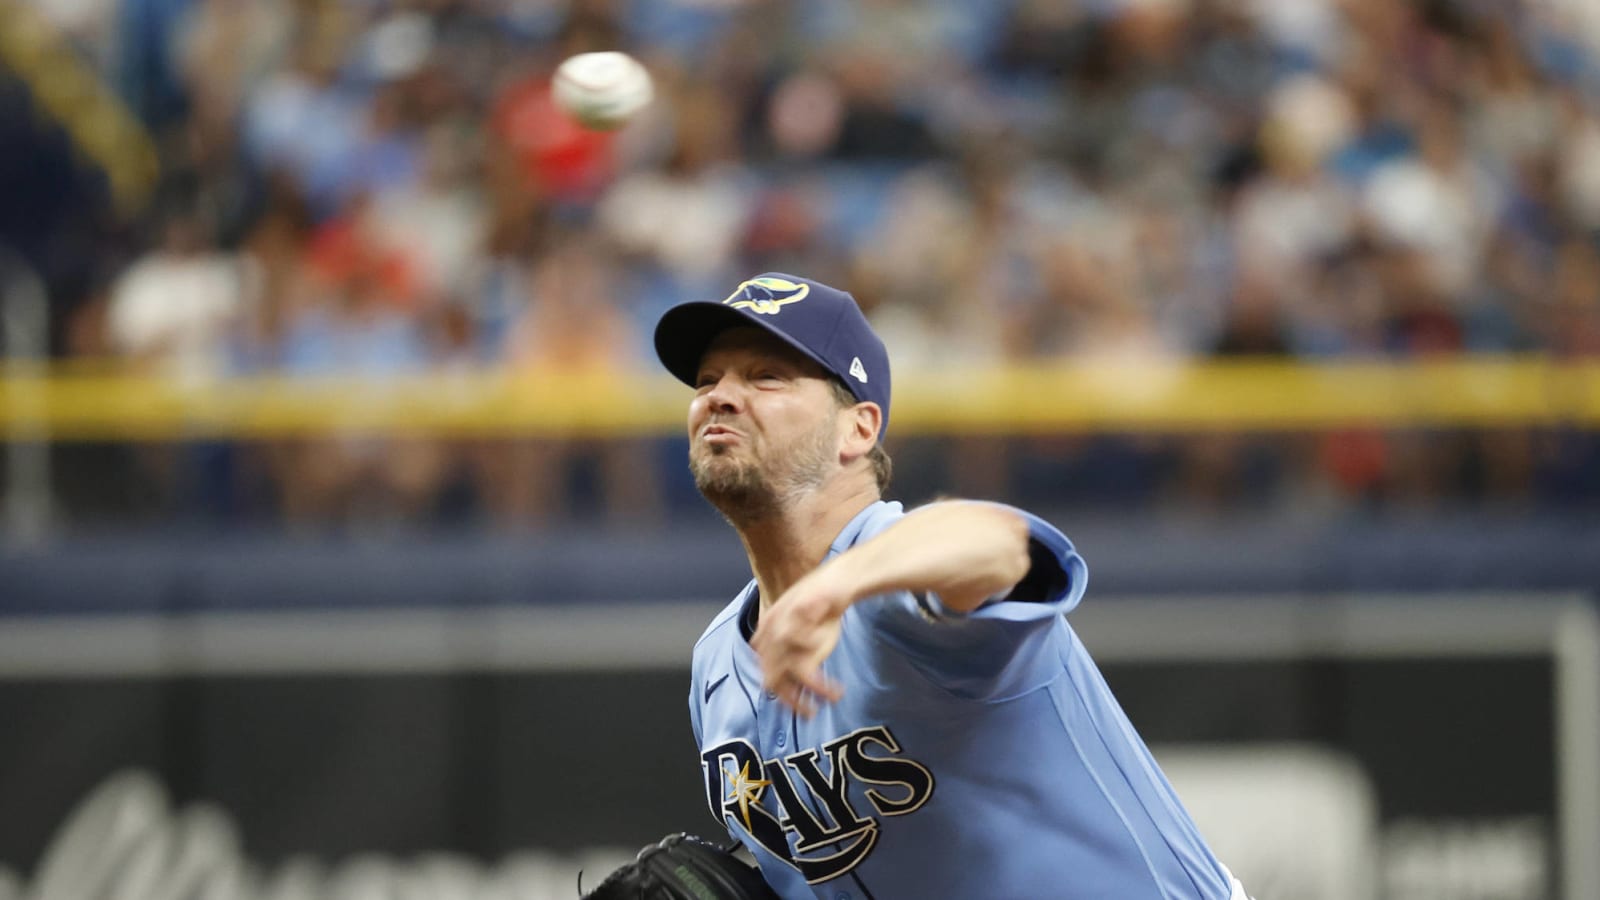 Rays traded Rich Hill because their rotation was overcrowded?